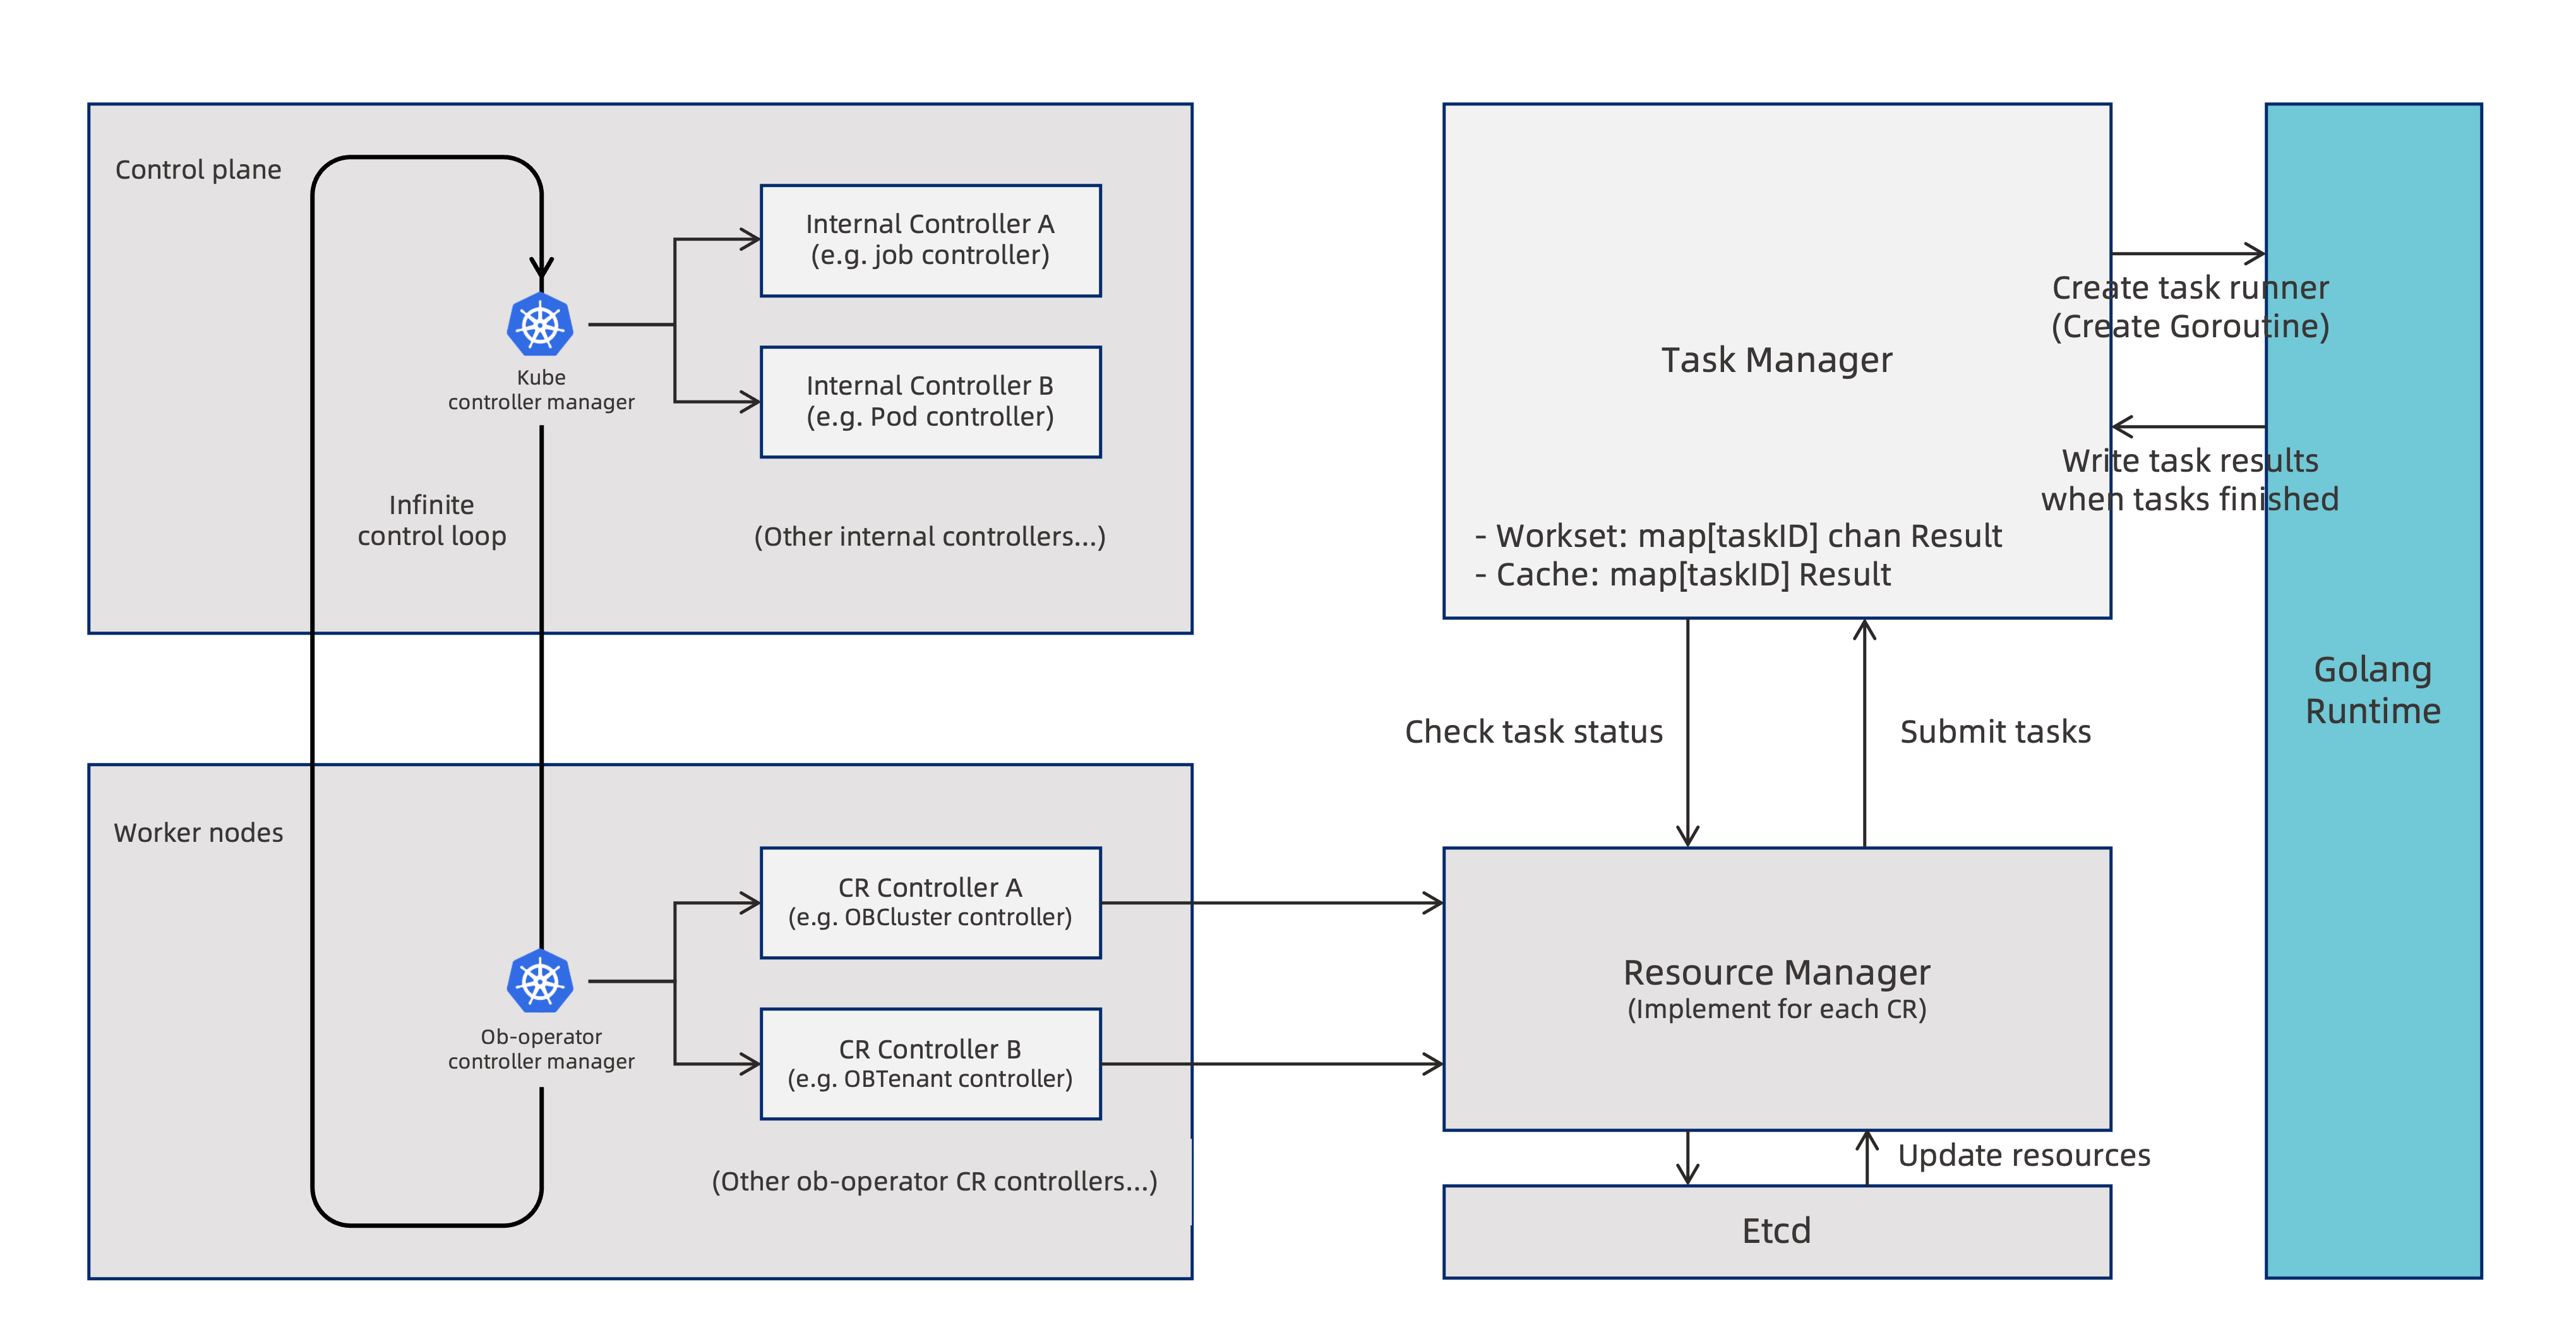 The relationship among the control loop, resource manager, and task manager